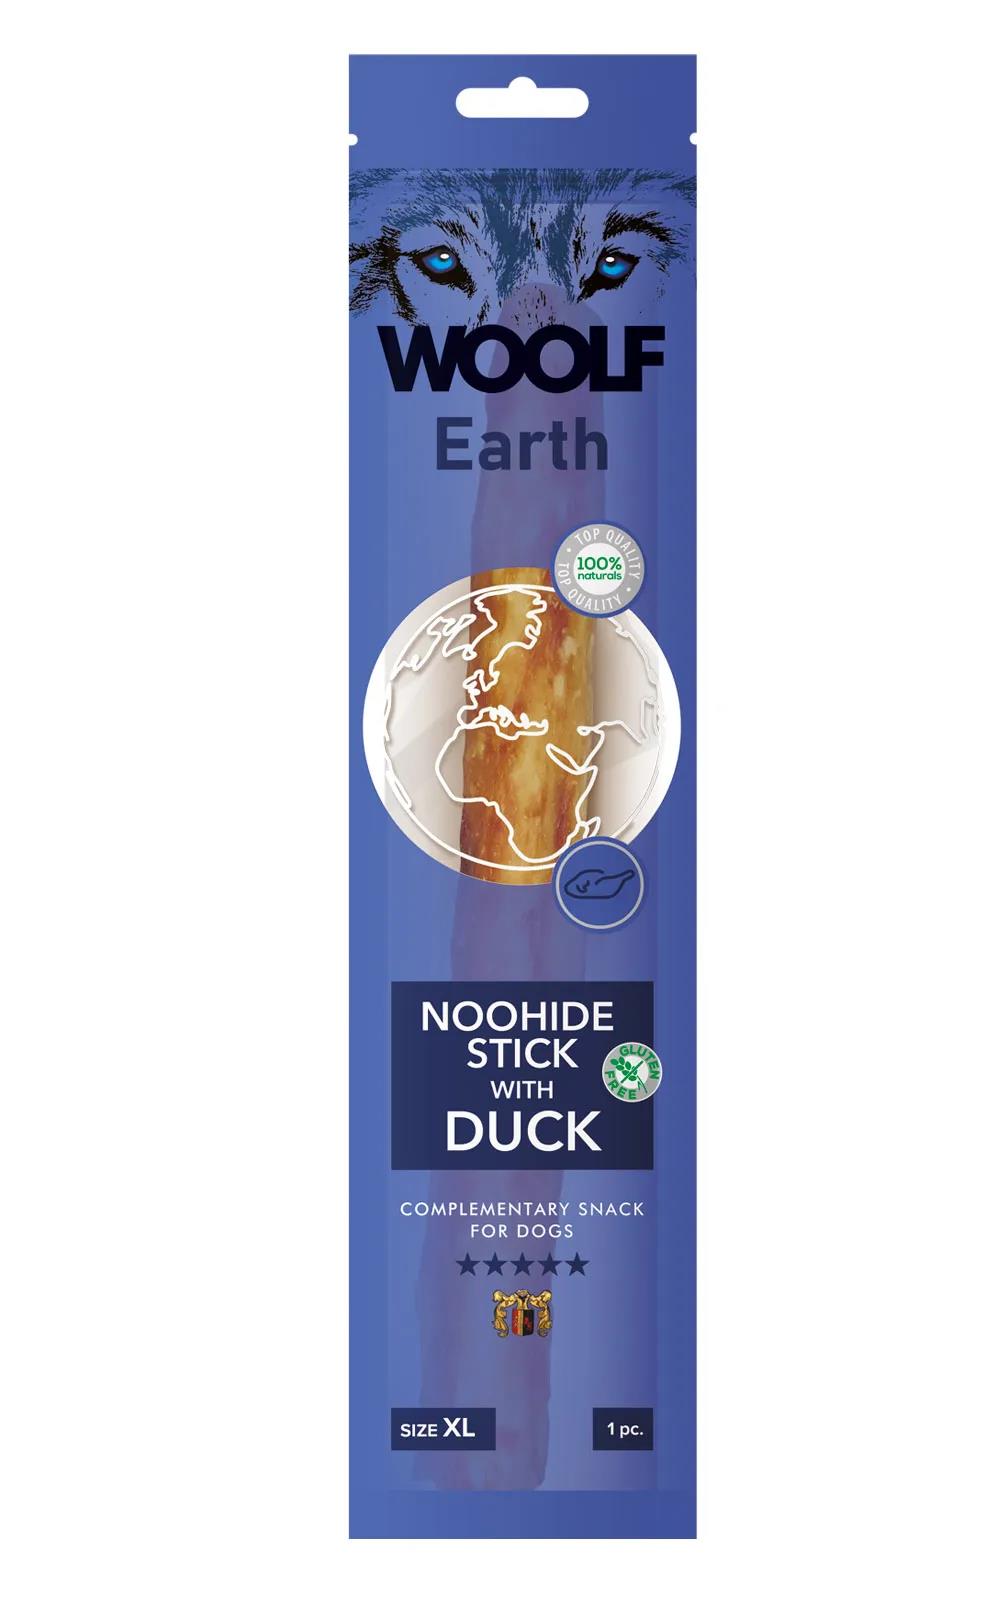 Woolf Earth Stick with Duck XL 85gr